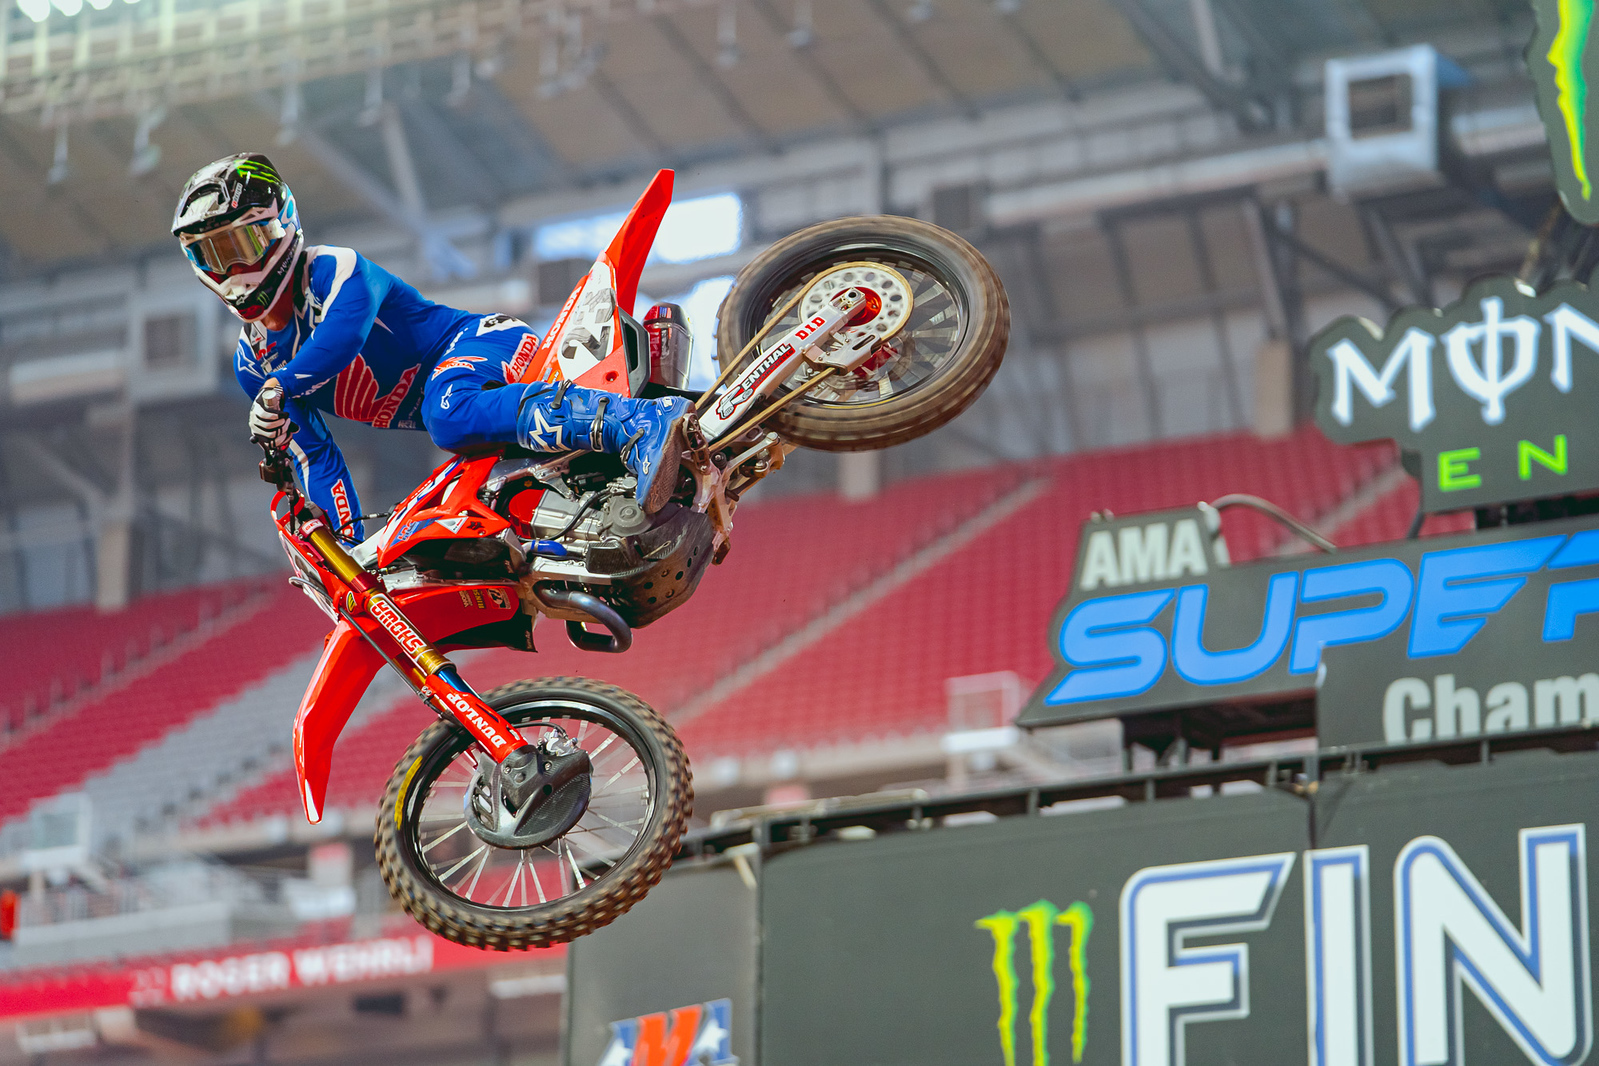 2023 Glendale Supercross Qualifying Report & Times Swapmoto Live